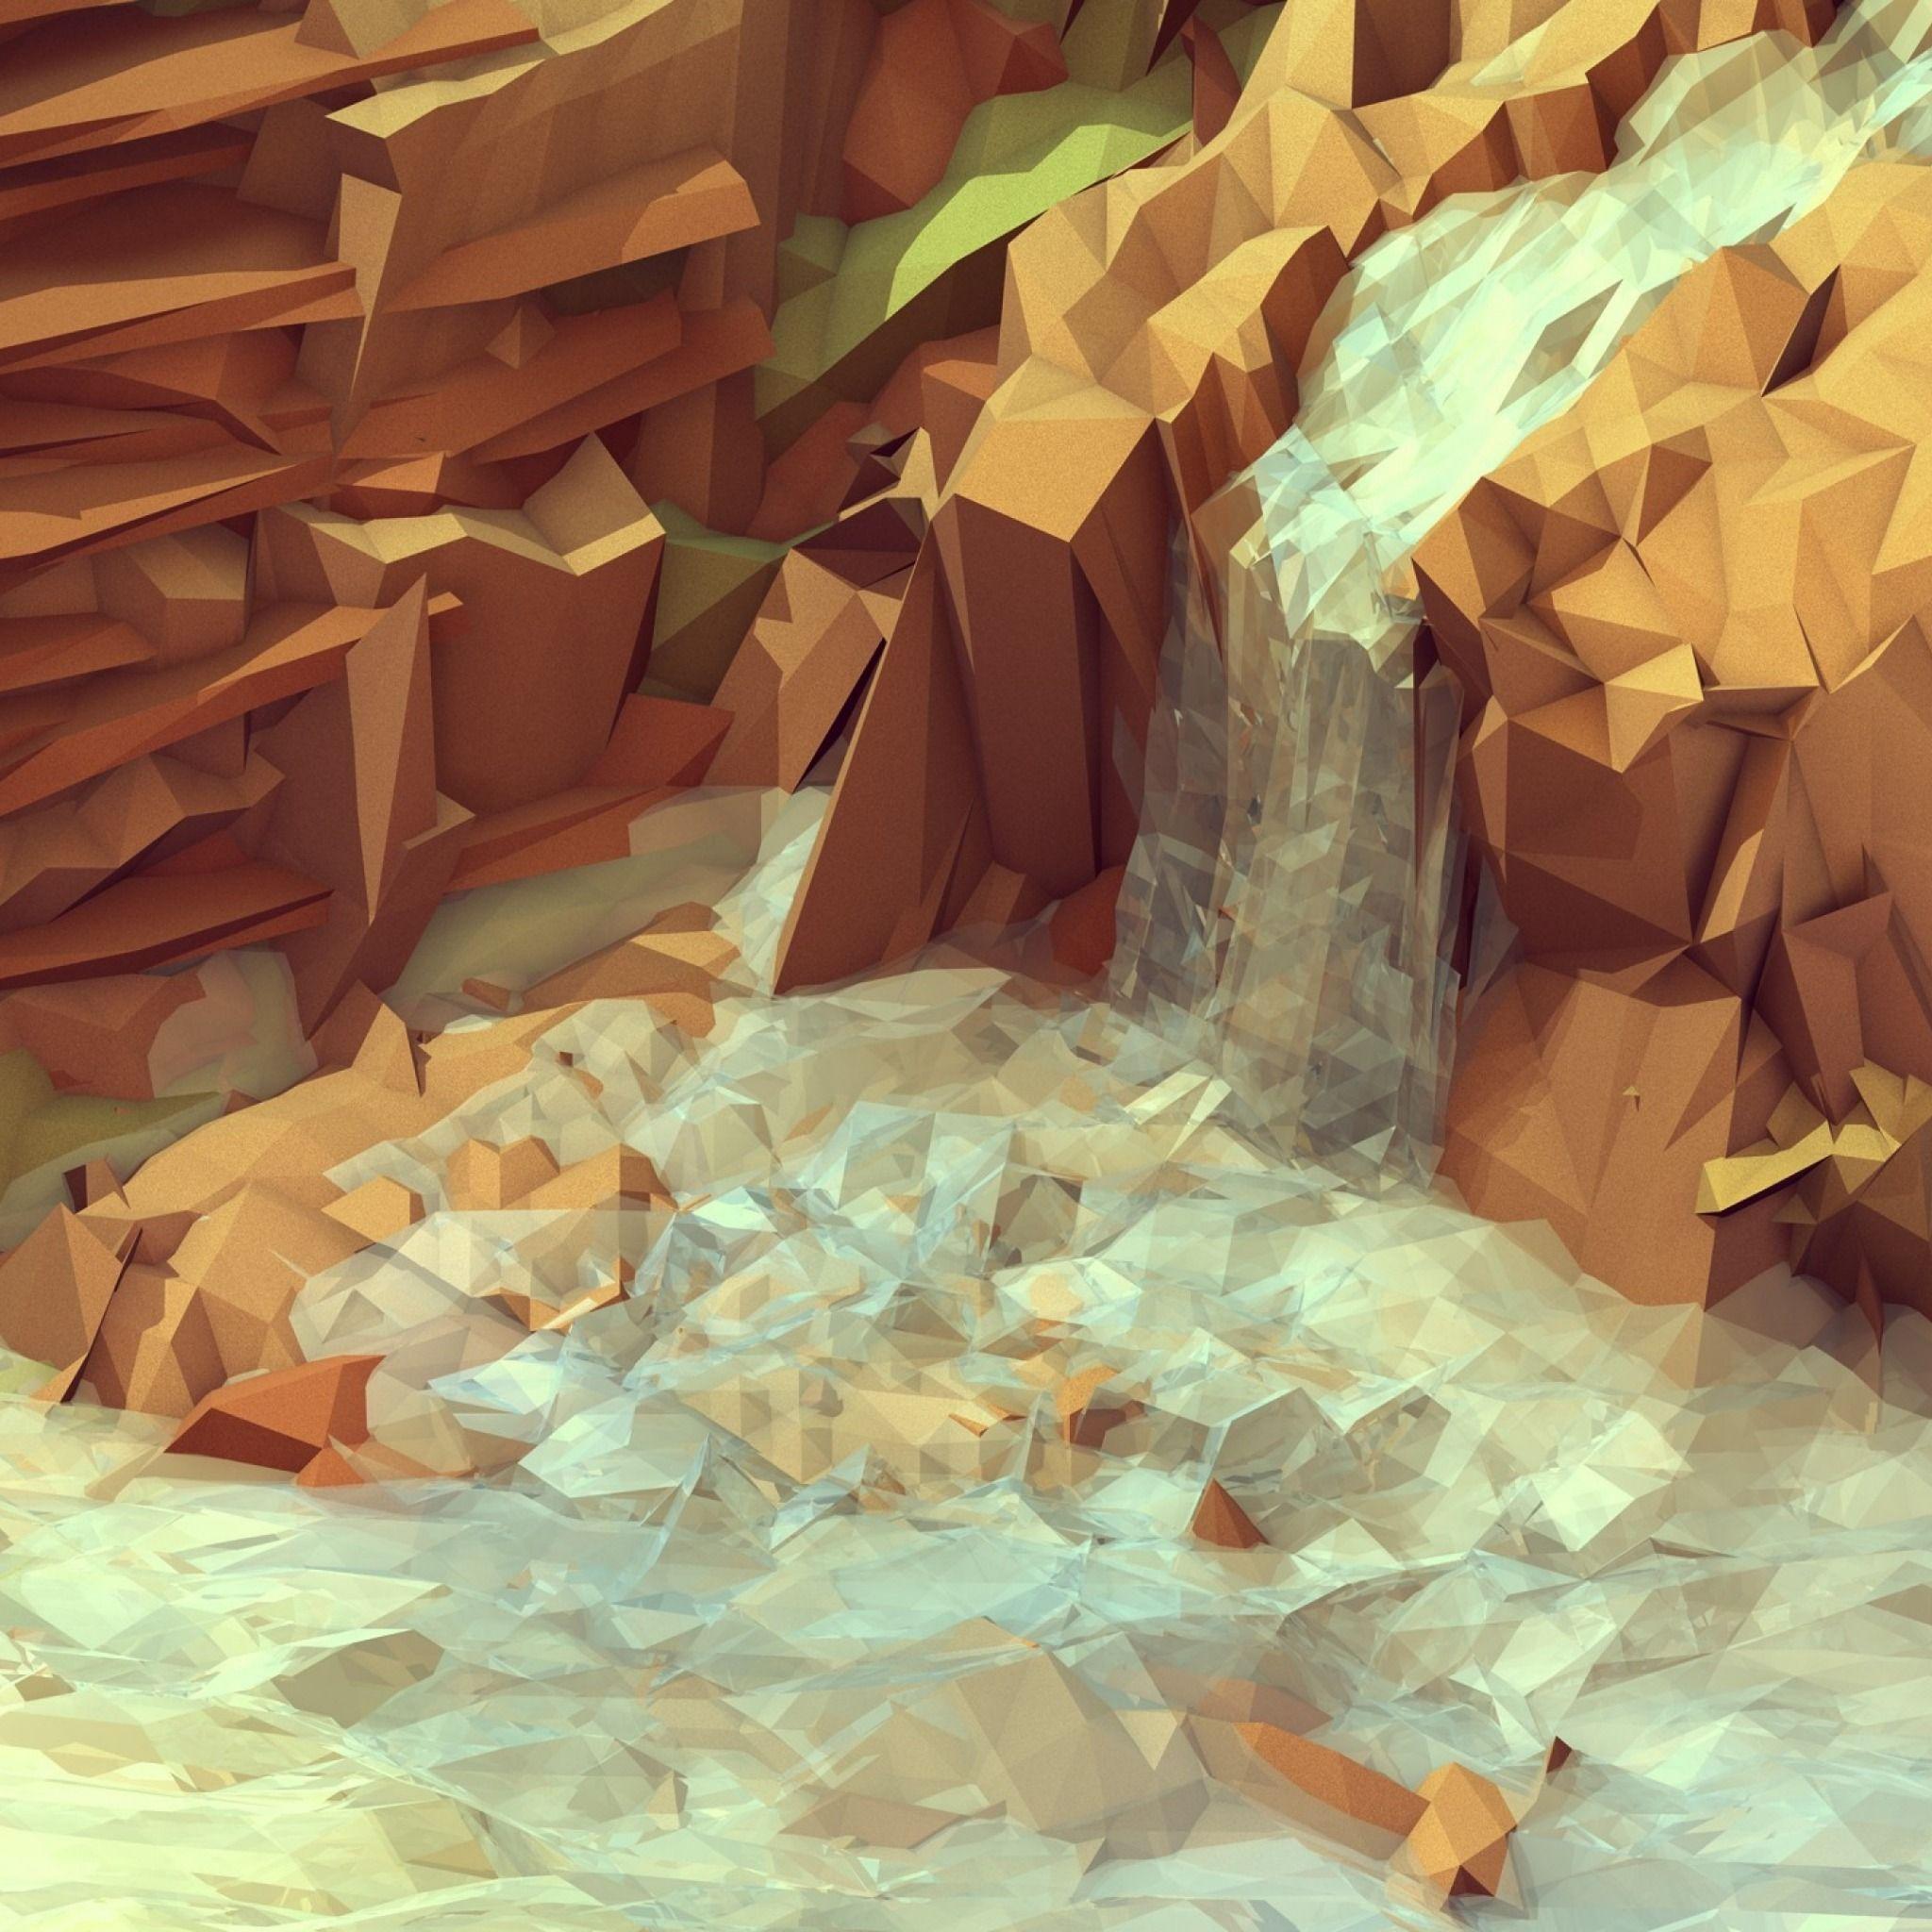 Near River to see more beautiful low poly art wallpaper